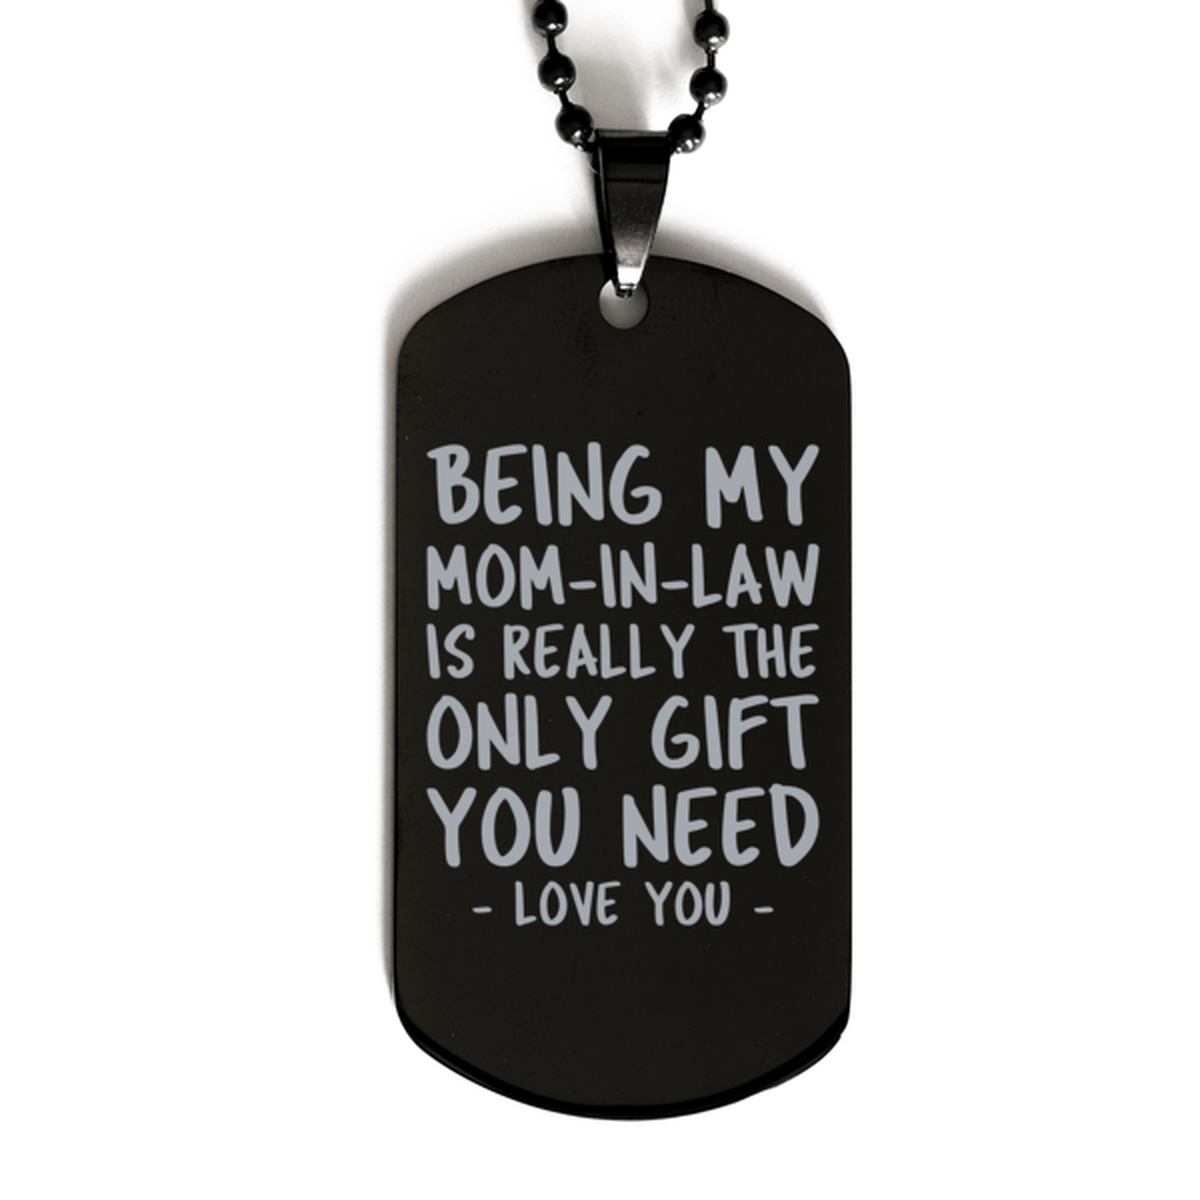 Funny Mom-in-law Black Dog Tag Necklace, Being My Mom-in-law Is Really the Only Gift You Need, Best Birthday Gifts for Mom-in-law